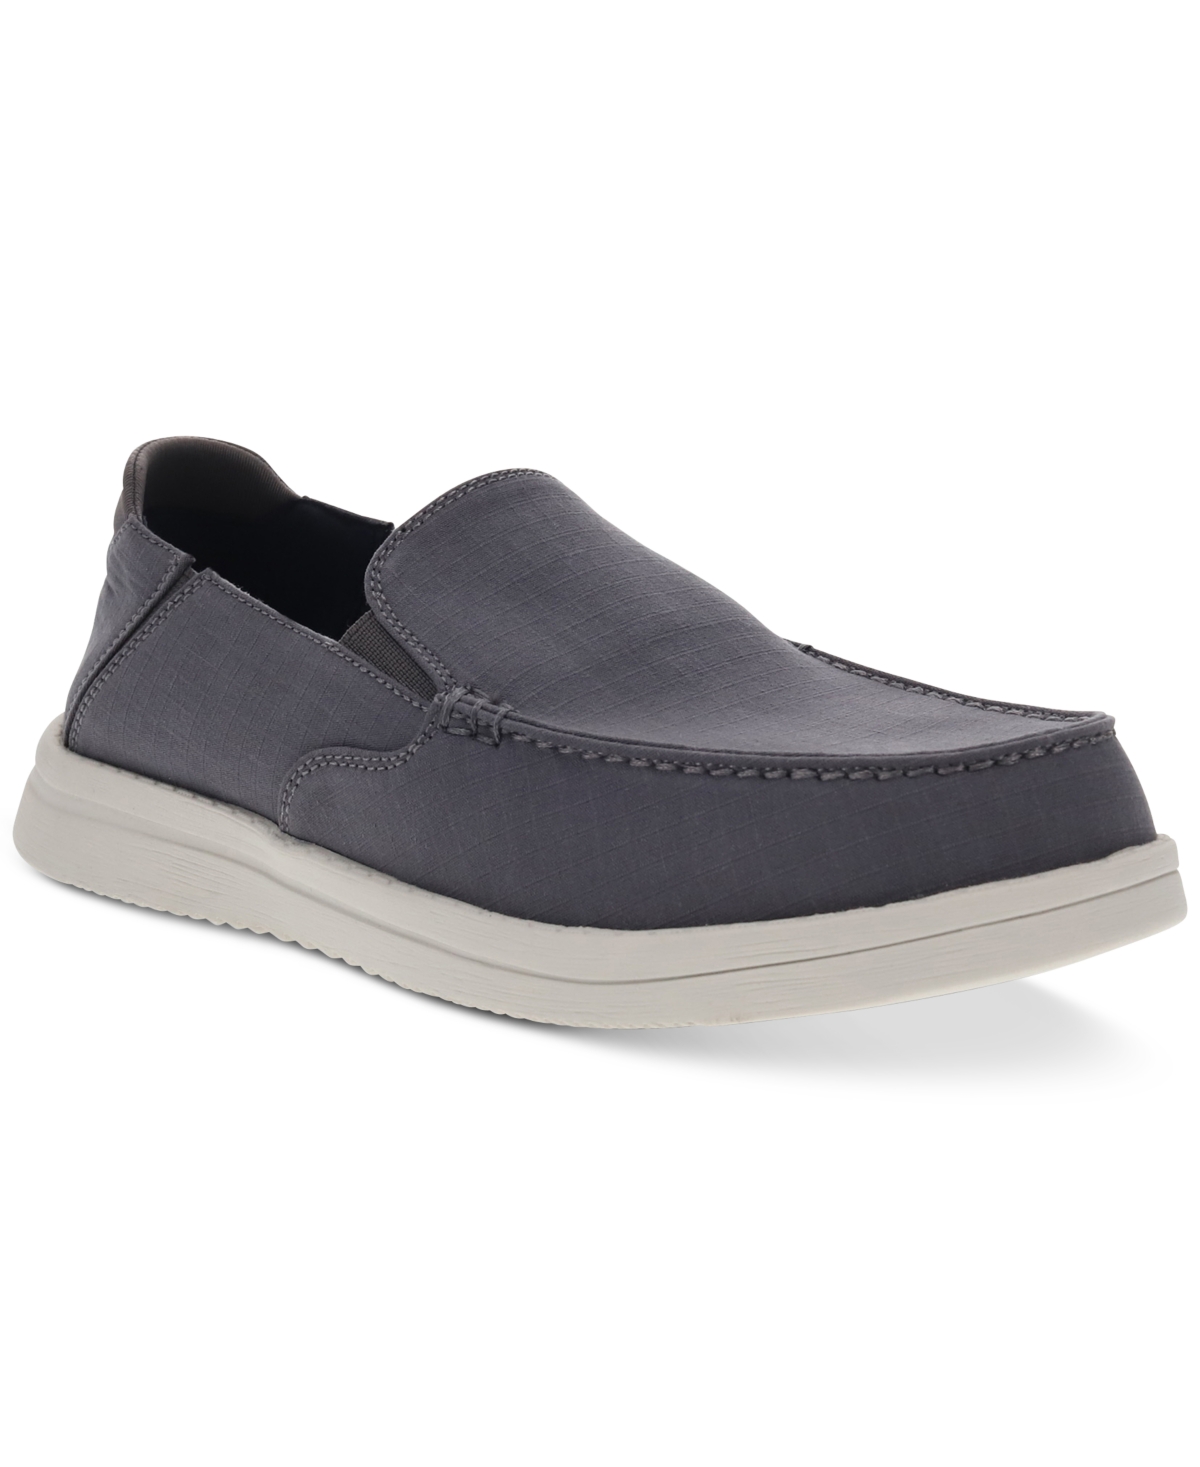 Men's Wiley Casual Twill Ripstop Loafers - Light Grey